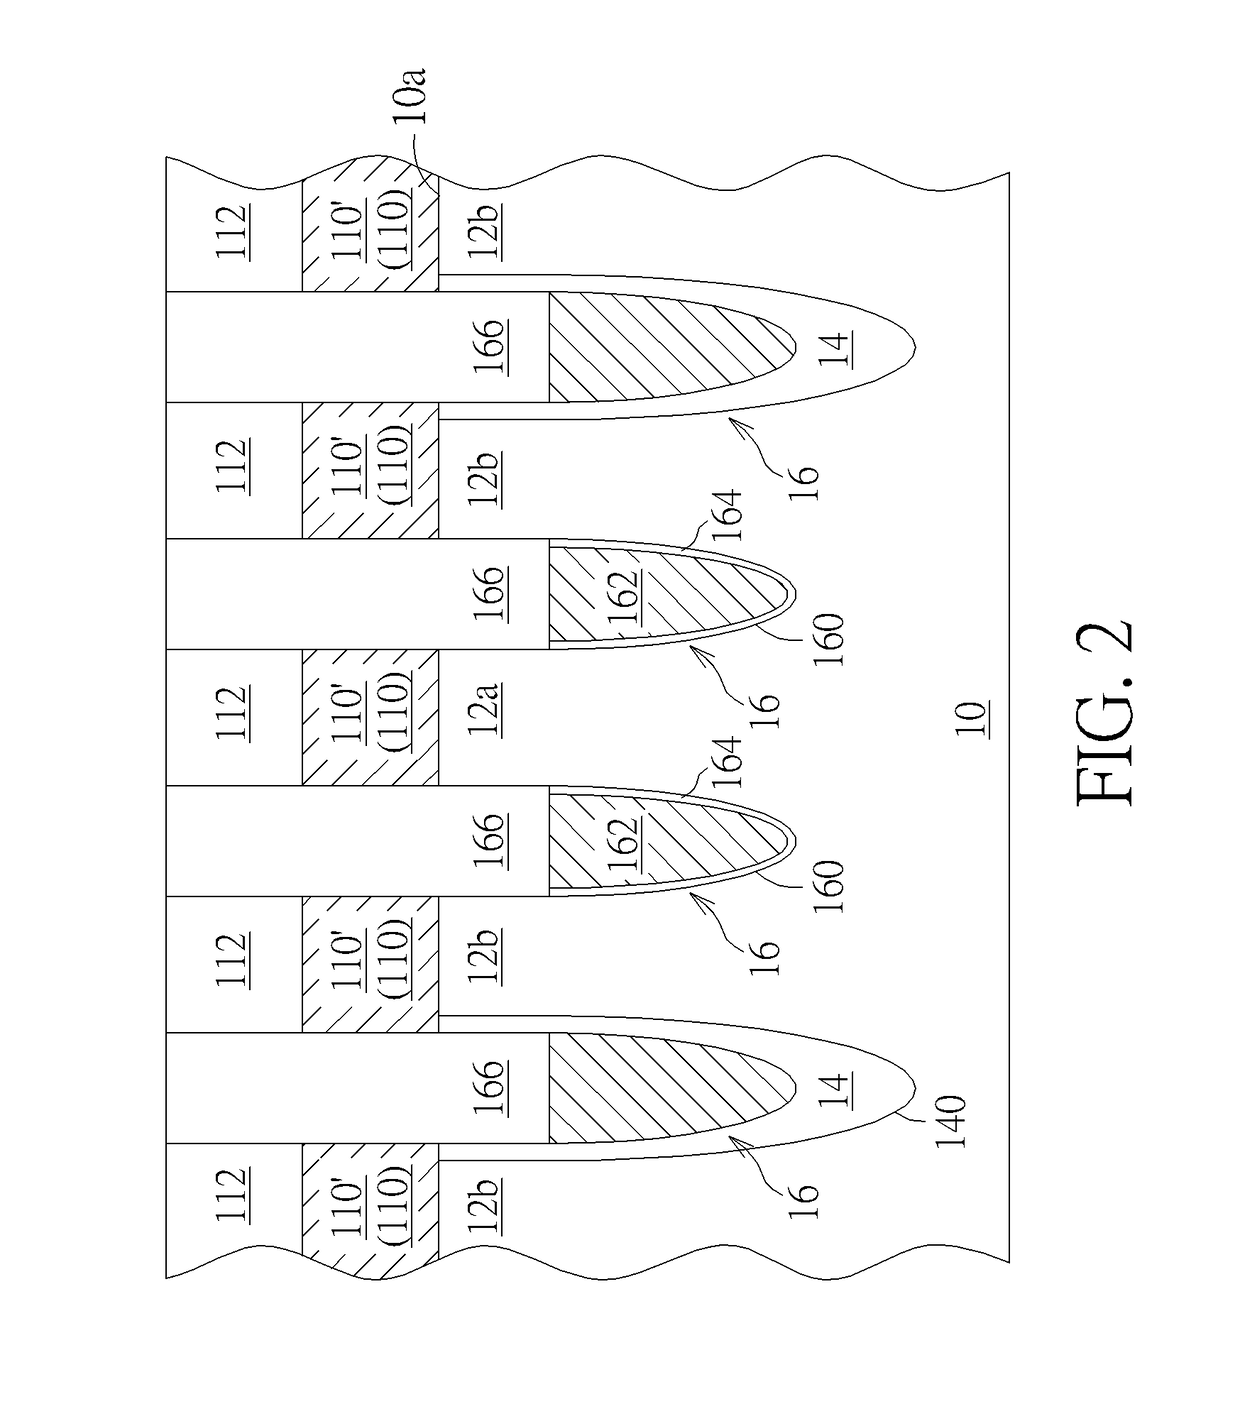 Semiconductor memory device having coplanar digit line contacts and storage node contacts in memory array and method for fabricating the same